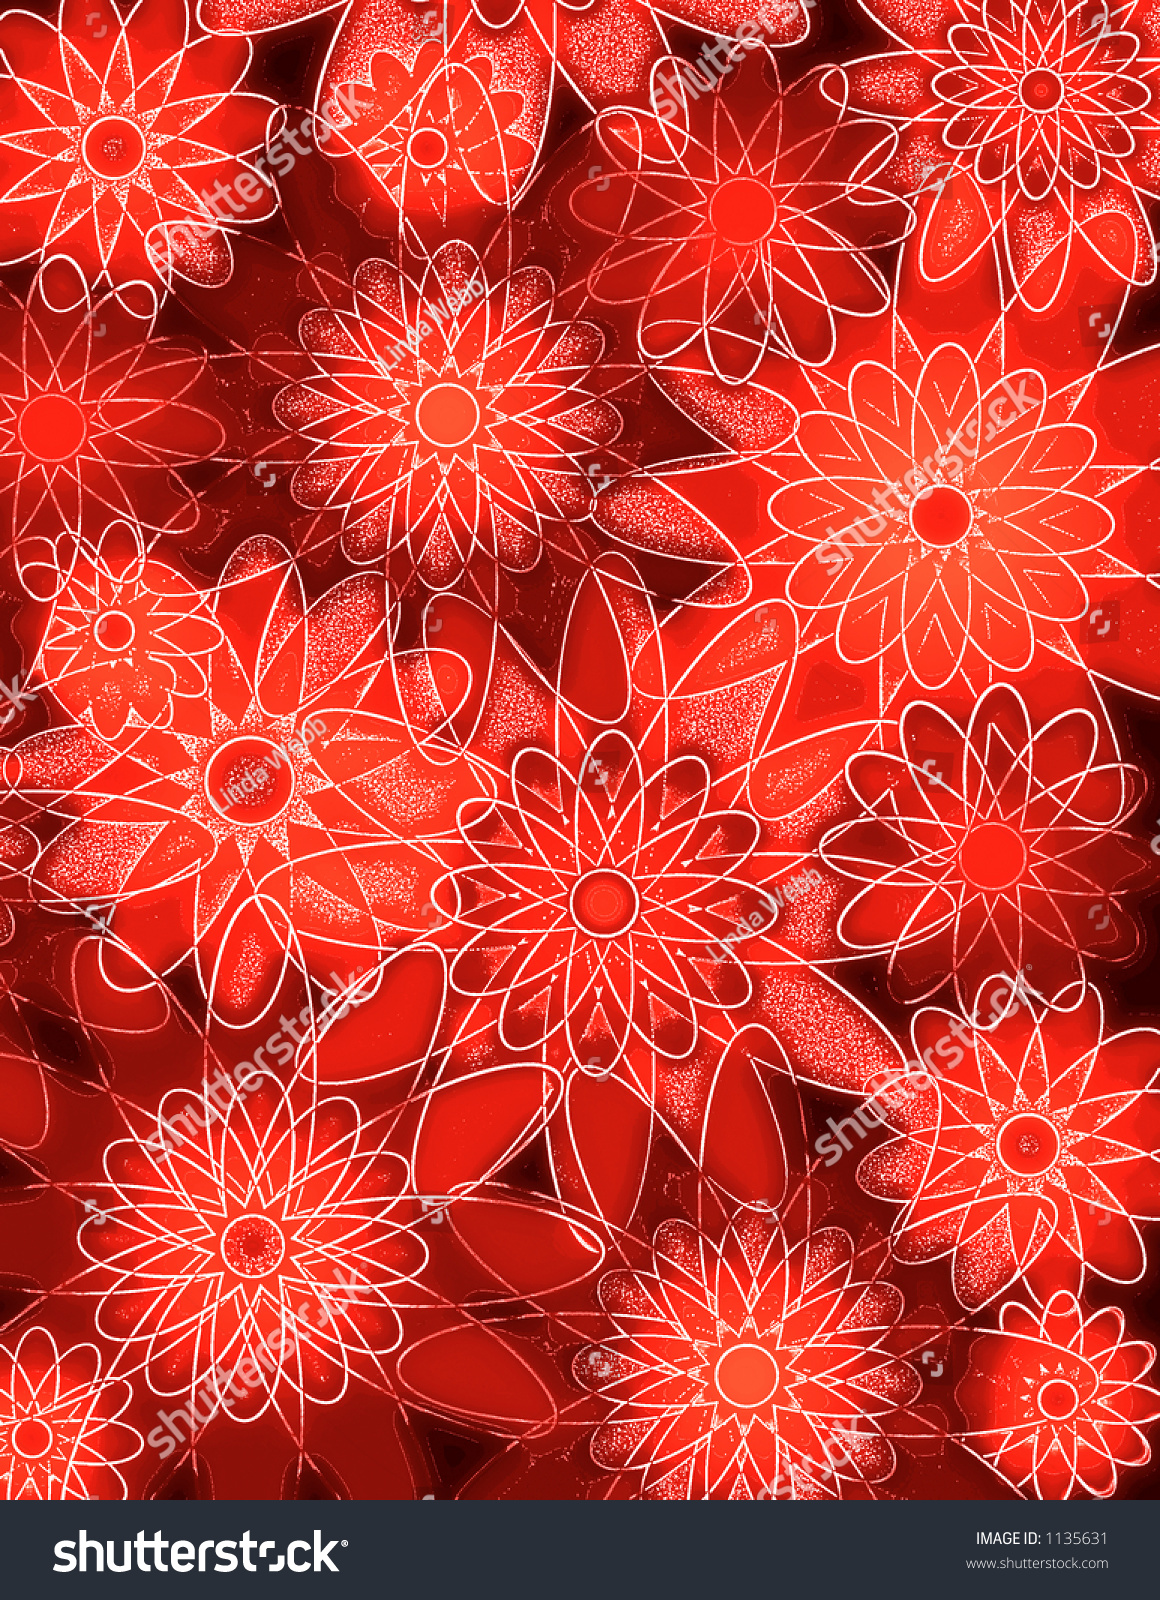 Red Blooming Flowers Background Stock Illustration 1135631 Shutterstock